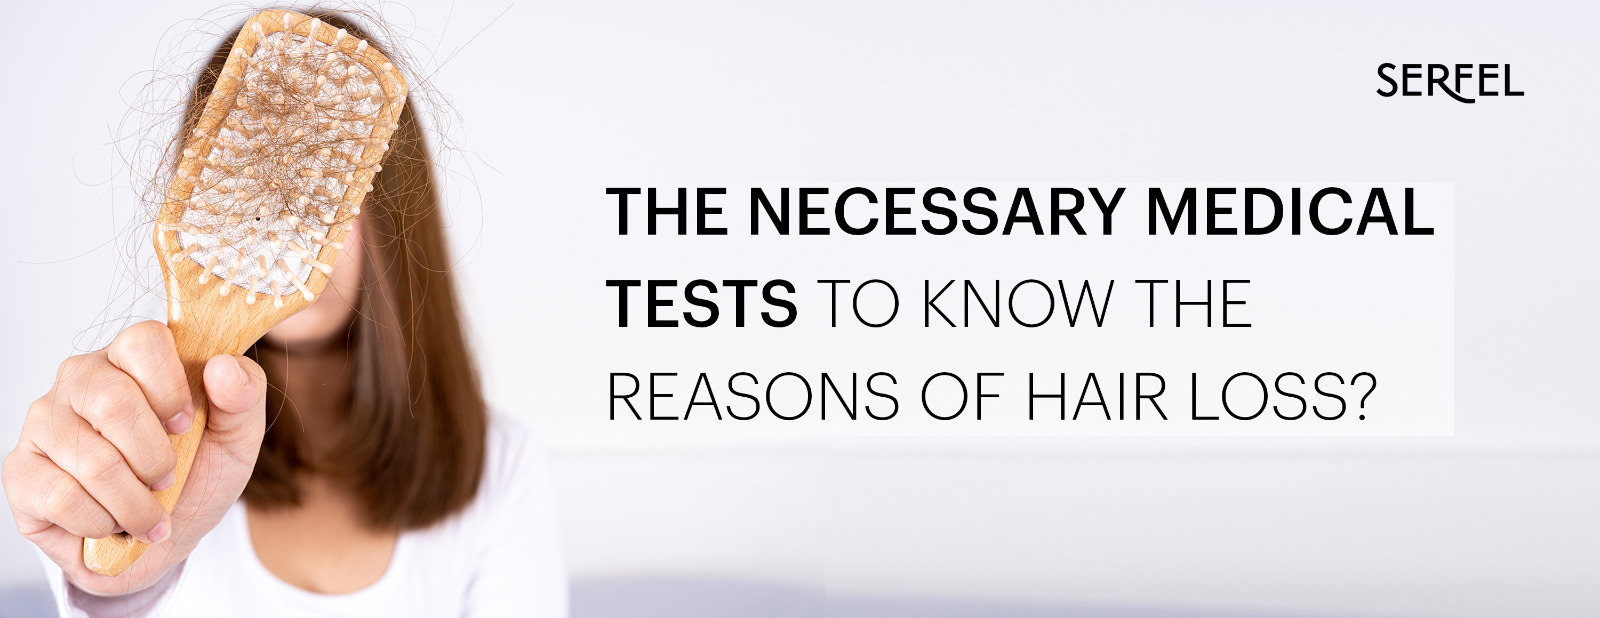 The Necessary Medical Tests to Know The Reasons of Hair Loss